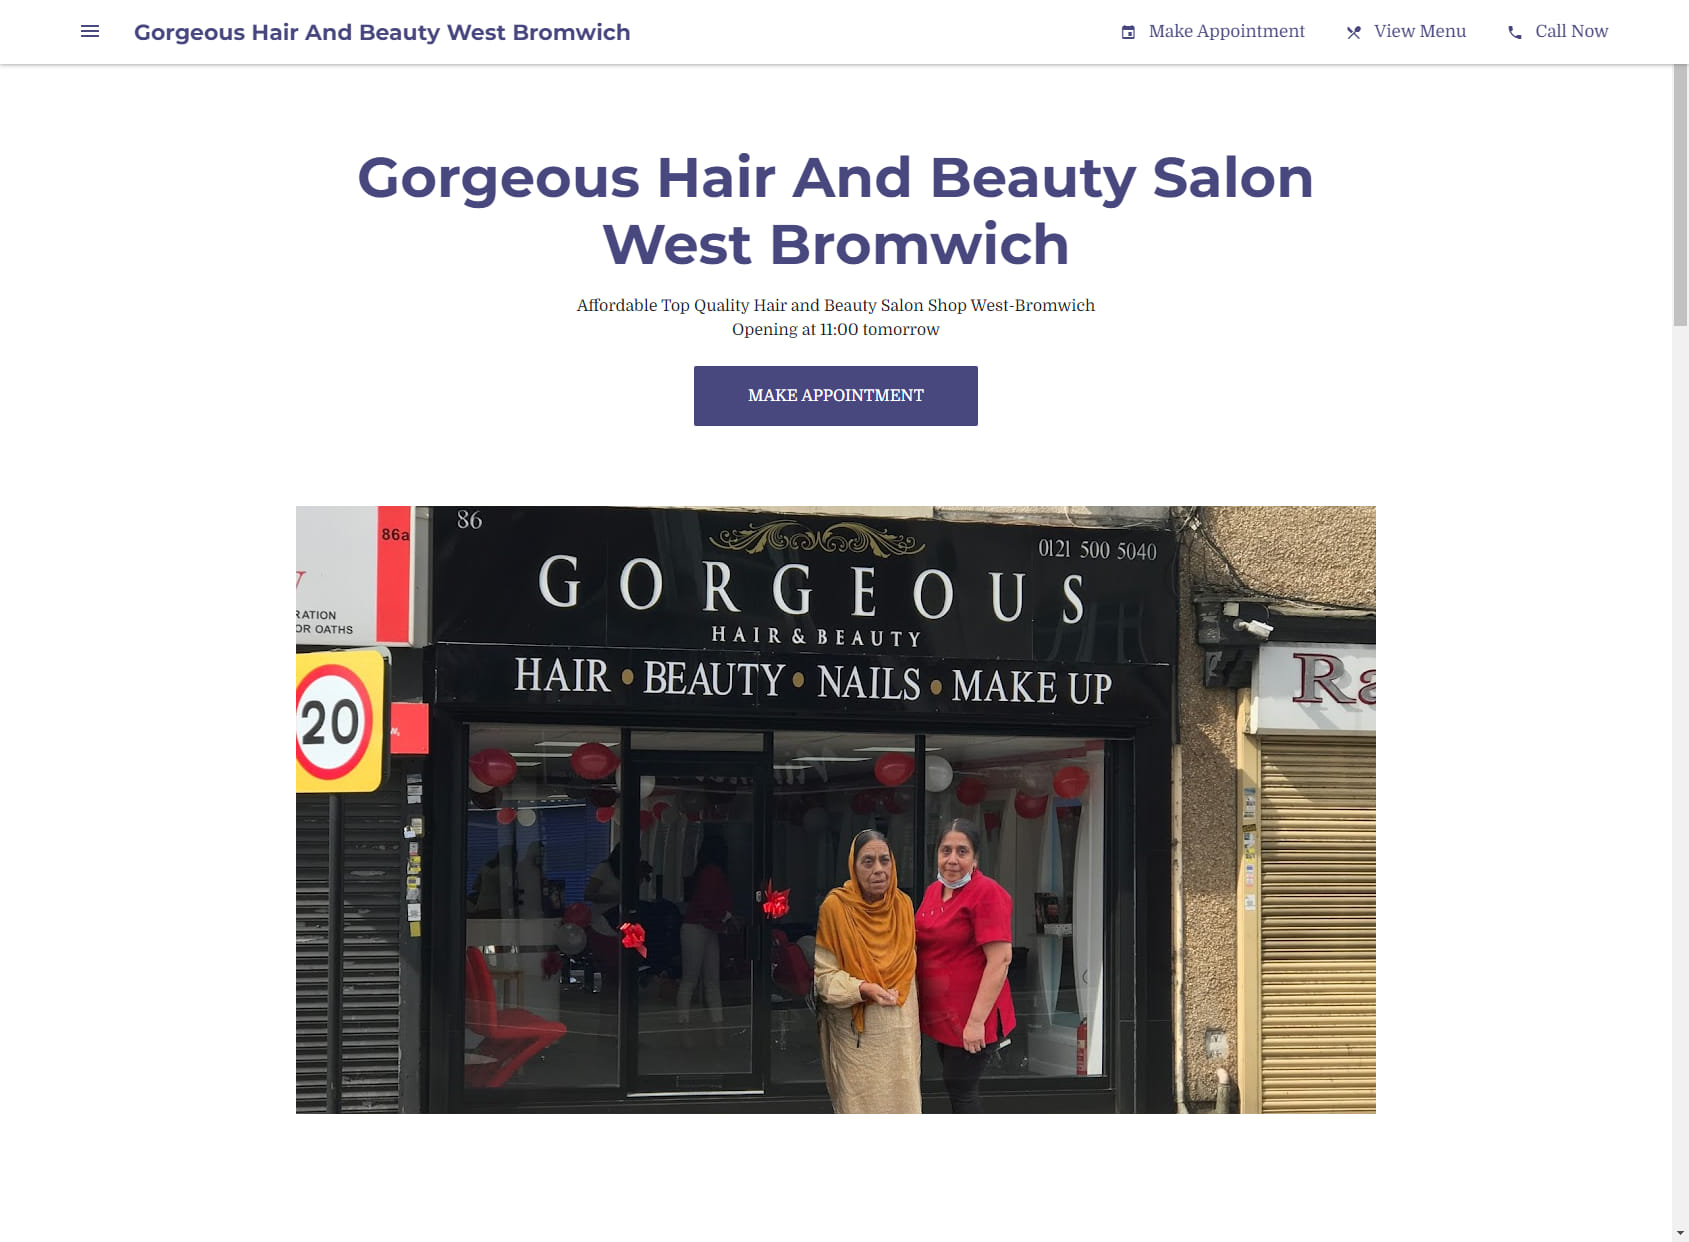 Gorgeous Hair And Beauty West Bromwich